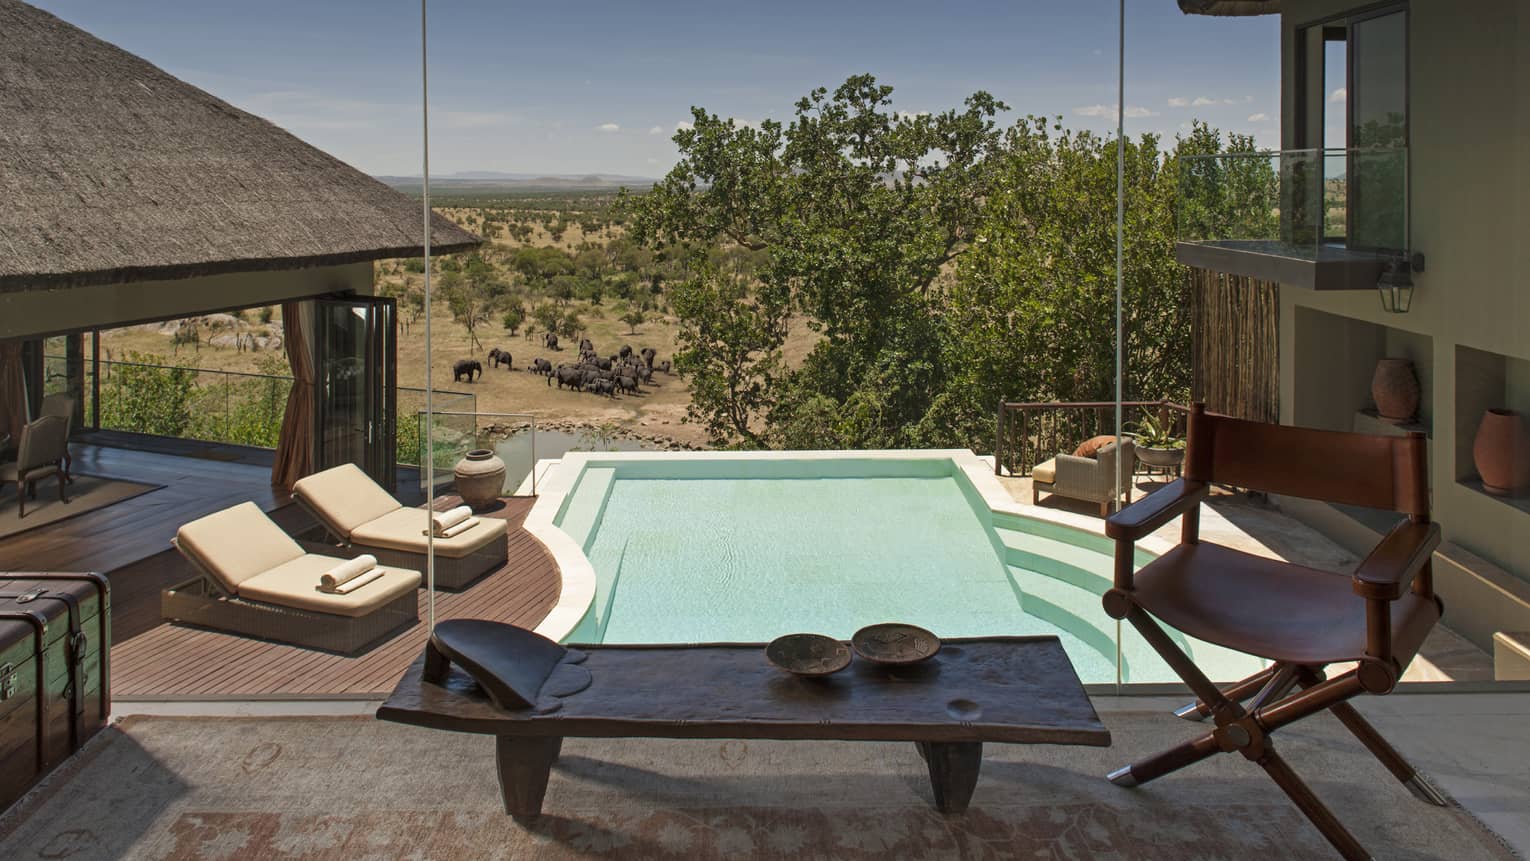 View out window to private pool with lounge chairs, view of elephants at watering hole